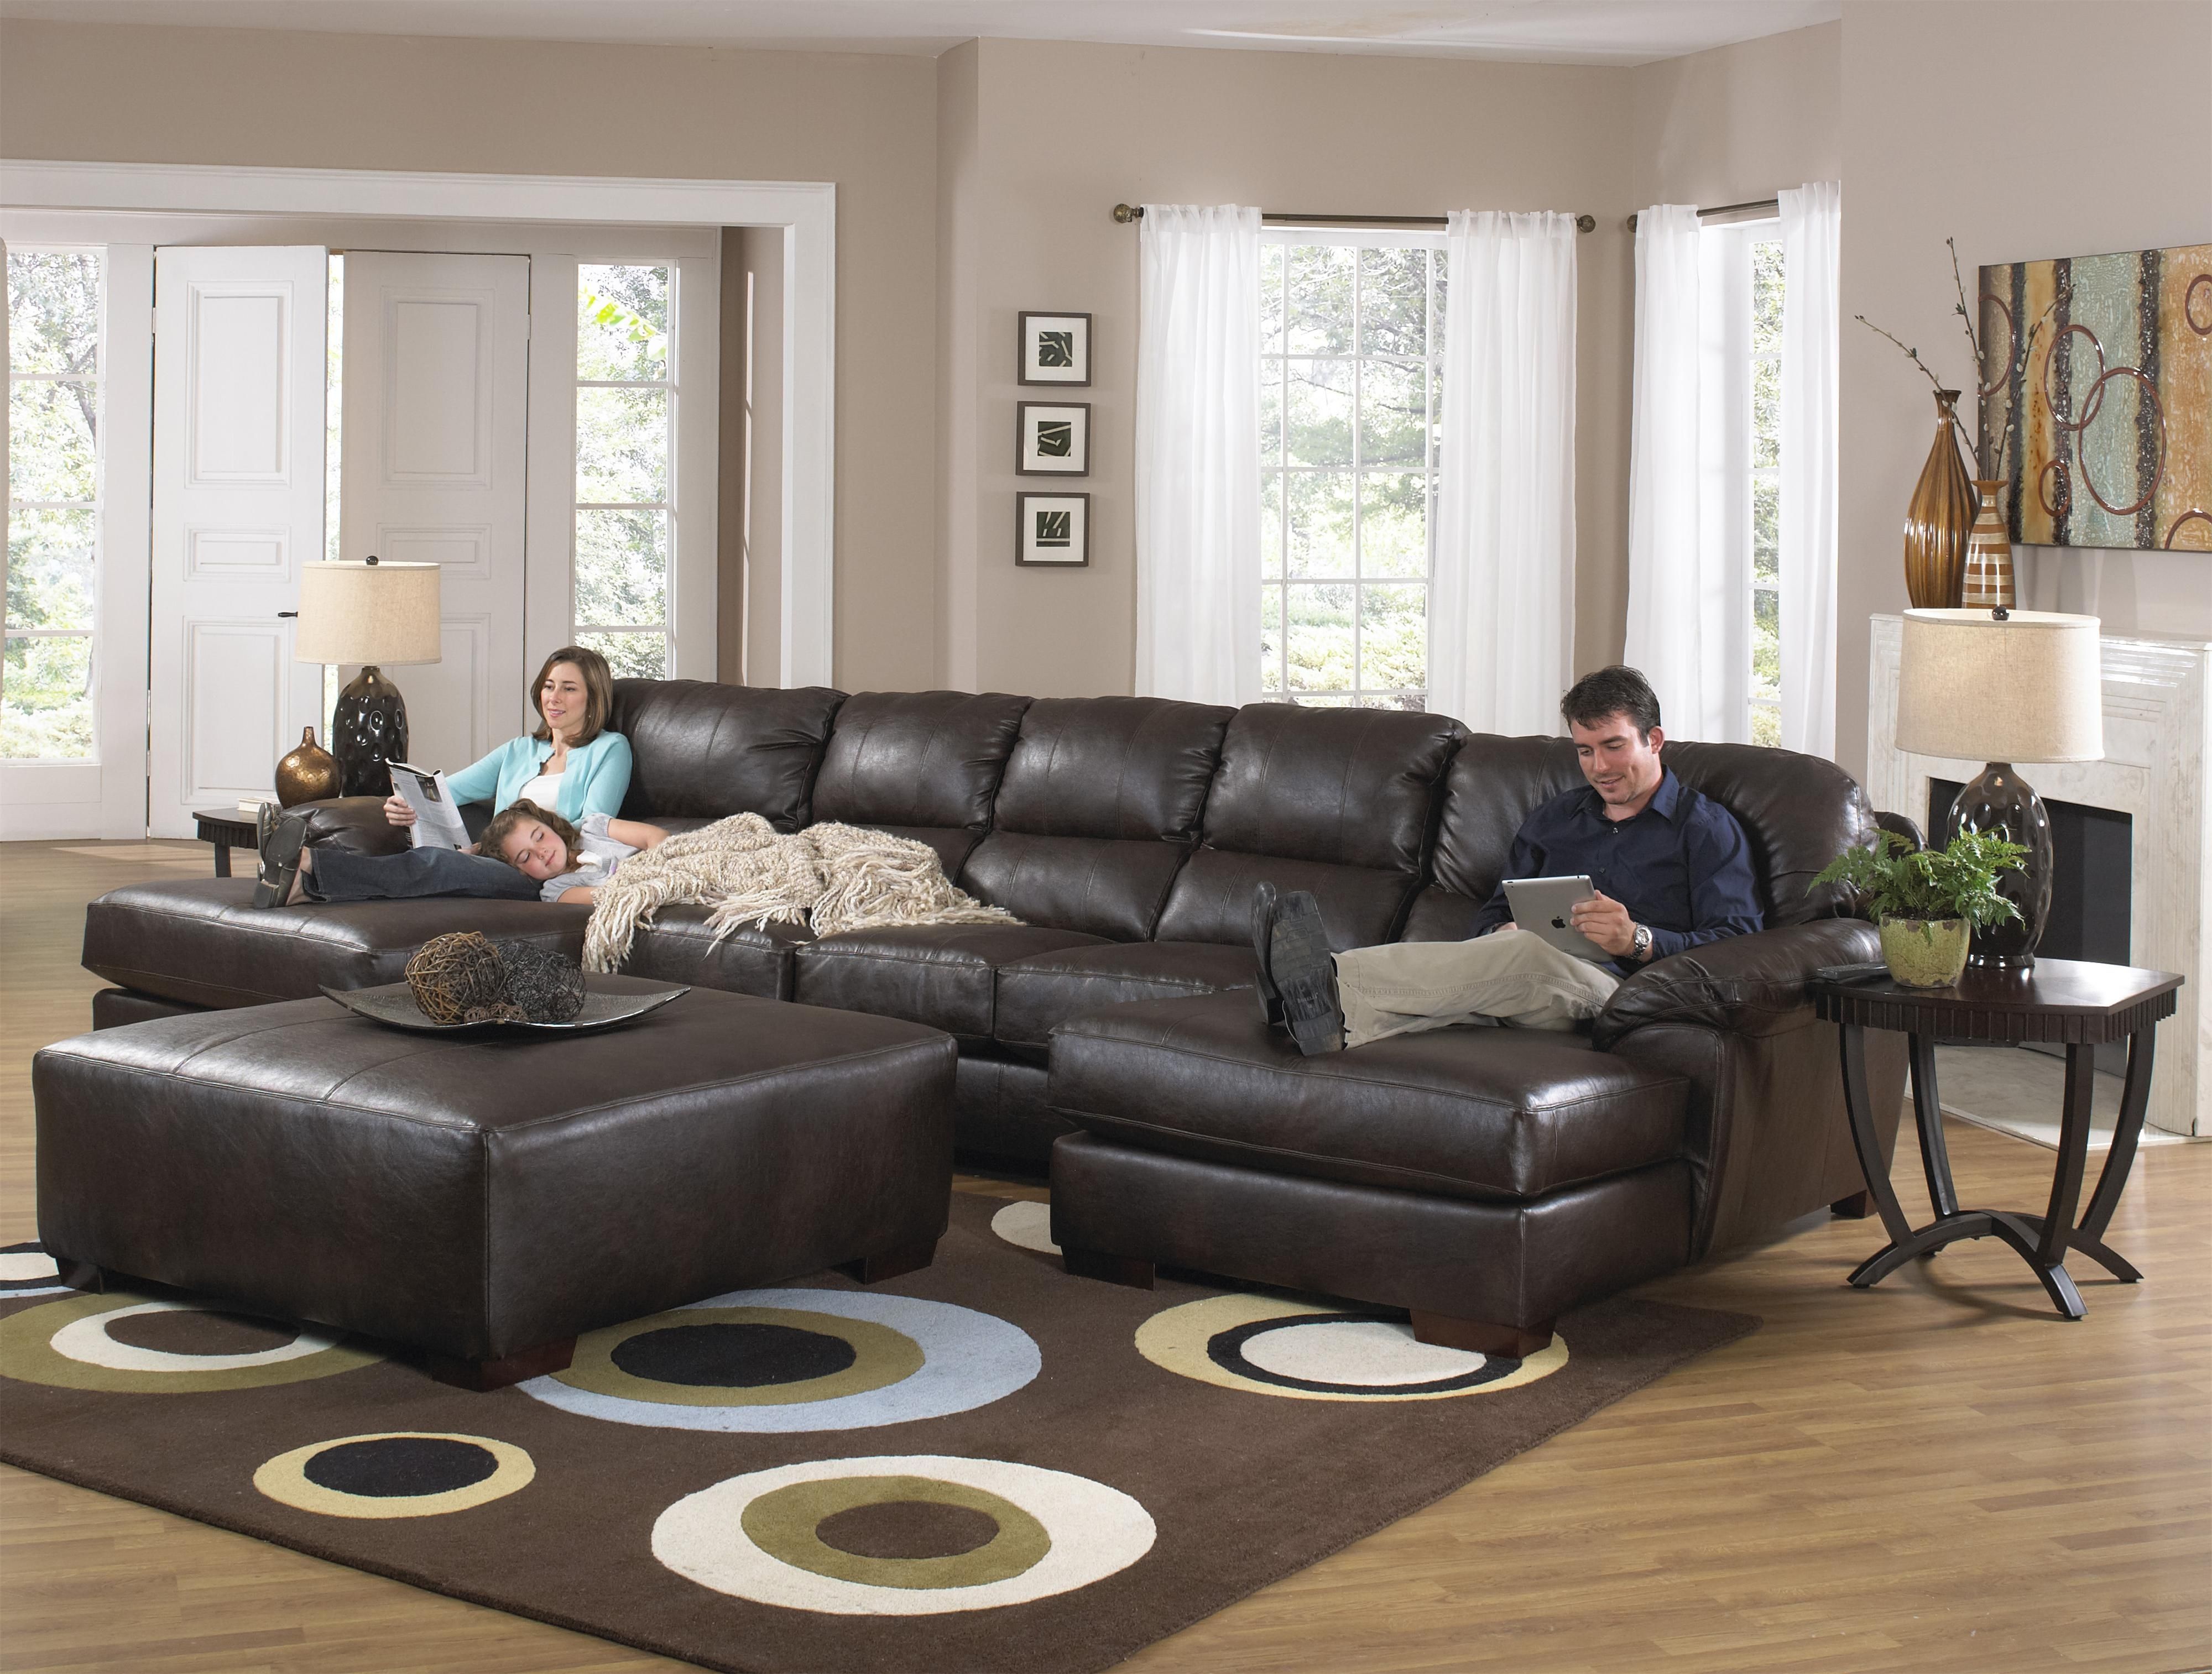 Two Chaise Sectional Sofa With Five Total Seatsjackson Furniture In Long Sectional Sofas With Chaise (View 2 of 10)